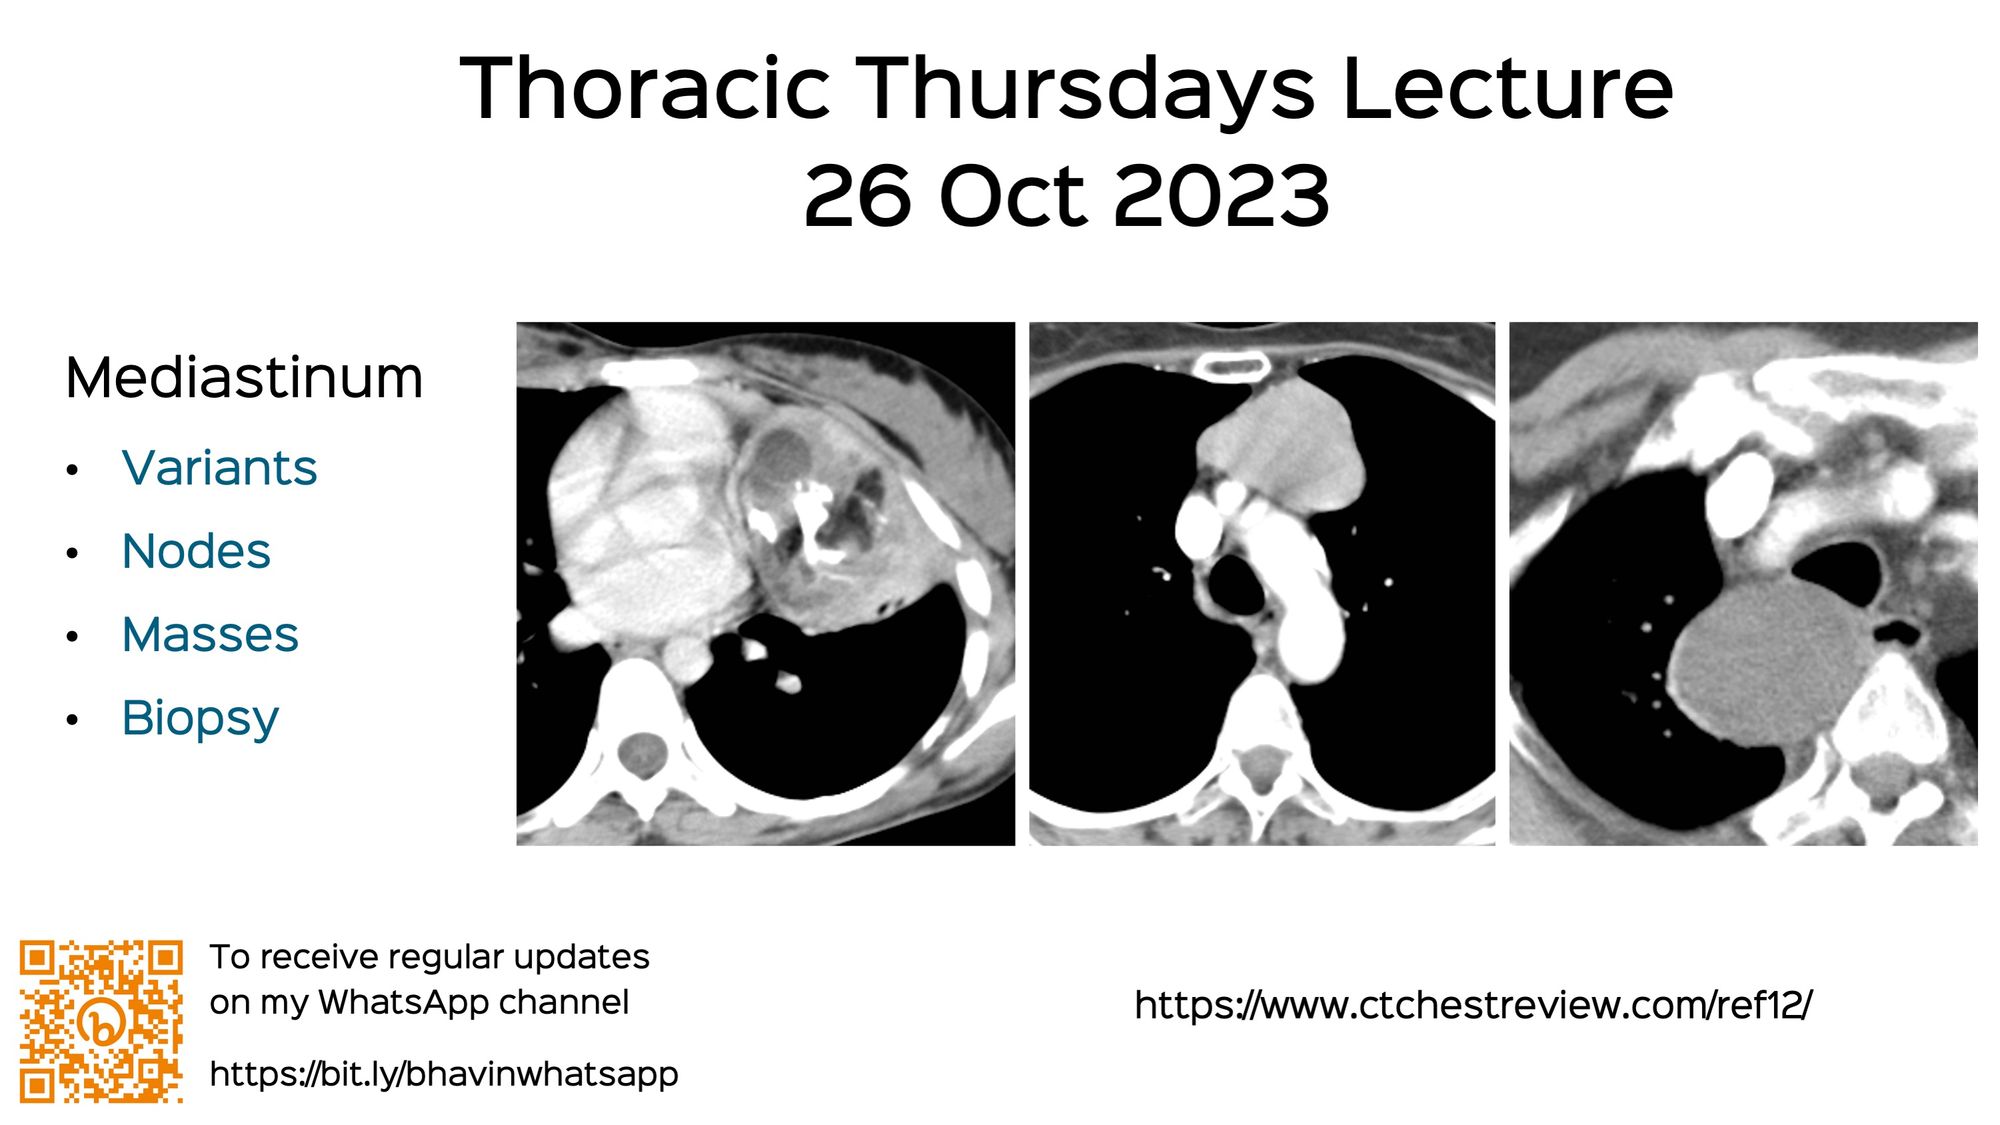 REF-Cafe Roentgen Thoracic Thursday Lecture - XII - 26th Oct 2023: Mediastinum